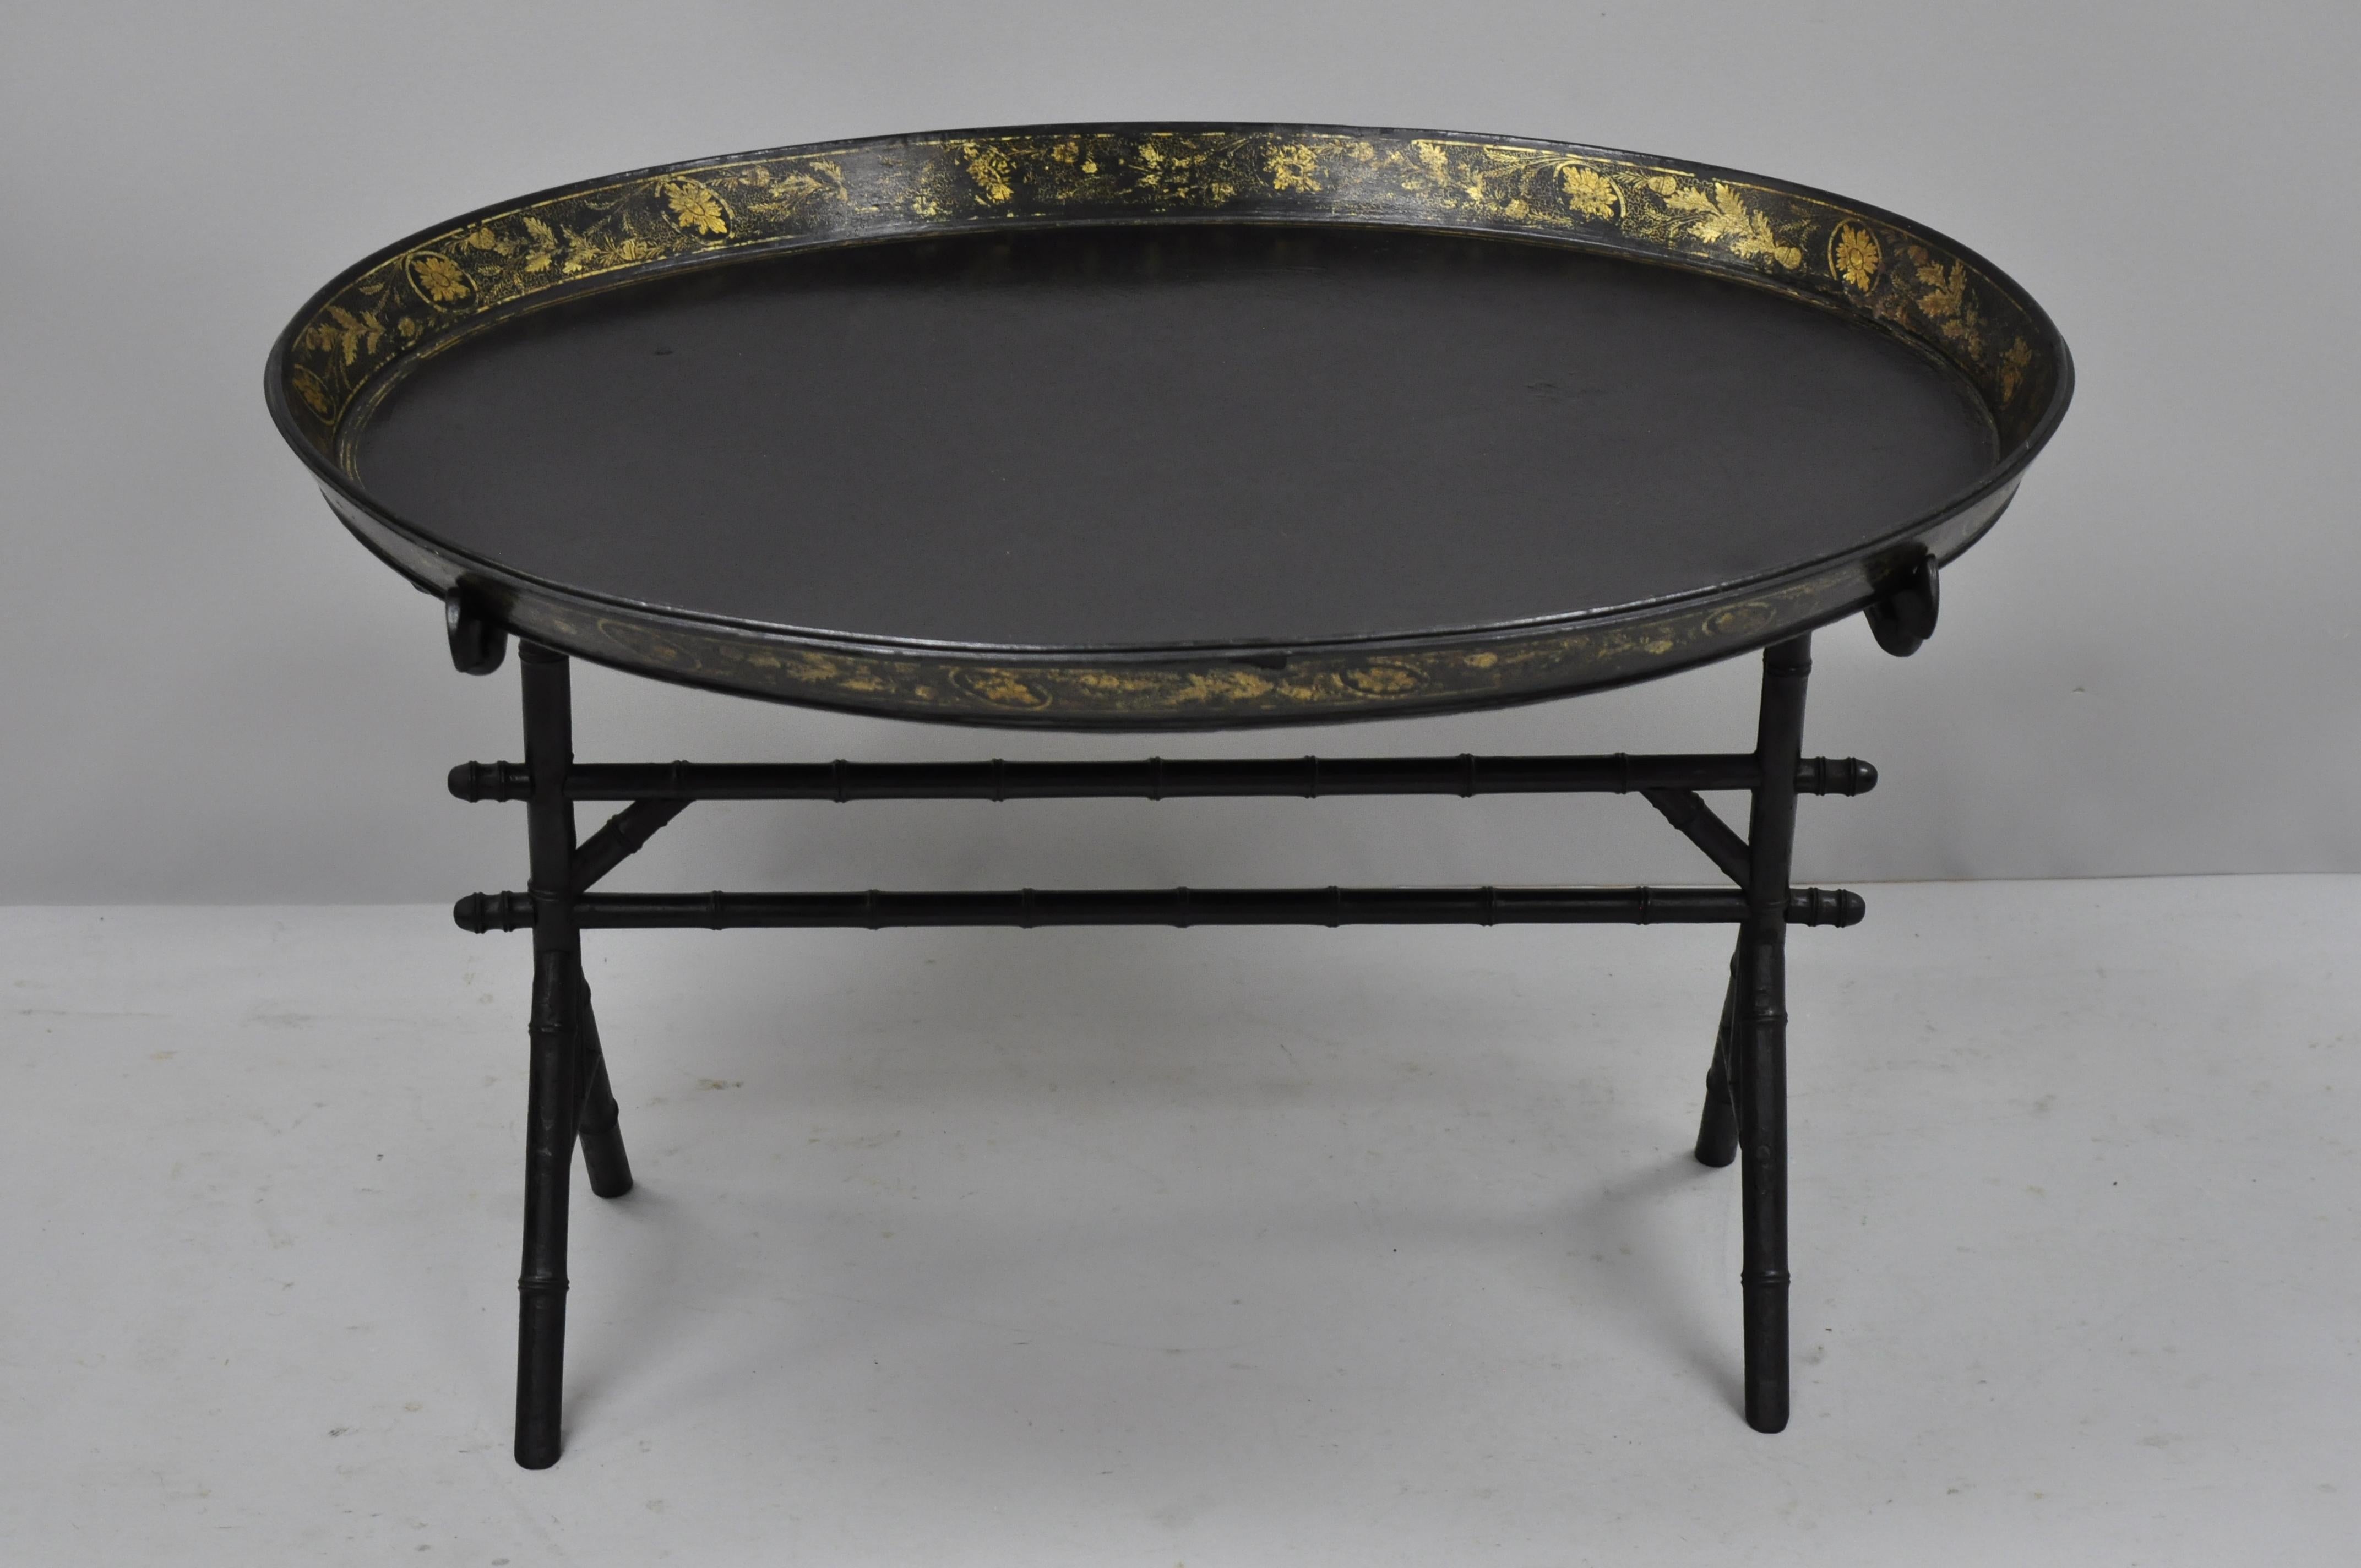 19th century English Victorian leather tole tray coffee table on faux bamboo base. Item features gold gilt decoration to leather wrapped removable tray, faux bamboo wooden base, very nice antique item, circa 19th century. Measurements: 21